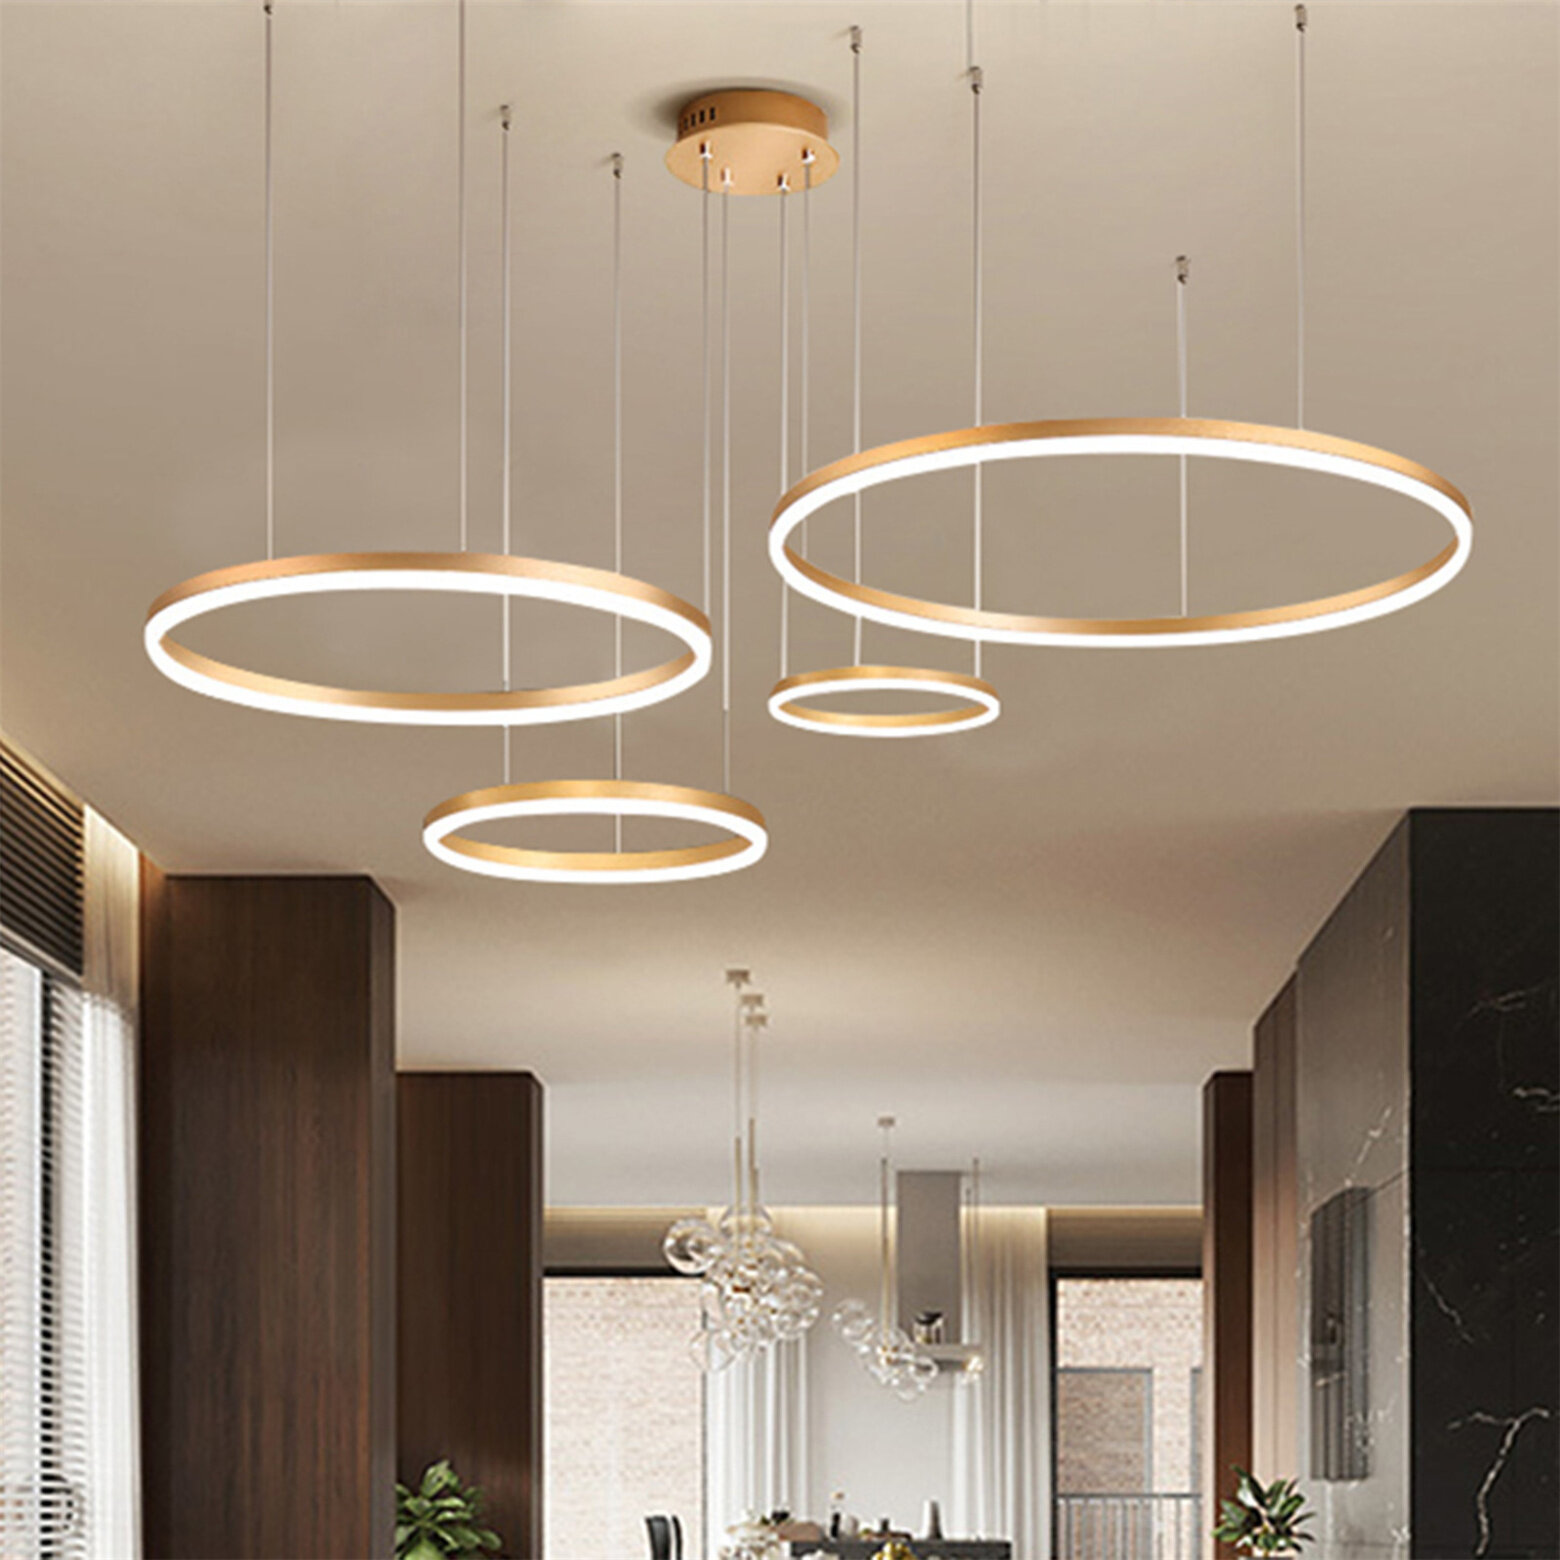 Line Shape Semi Flush Mount Ceiling Lights,Dimmable Ceiling Fixture with  Remote Control,Acrylic Bright Family Decorative Lighting Pendant lamp for